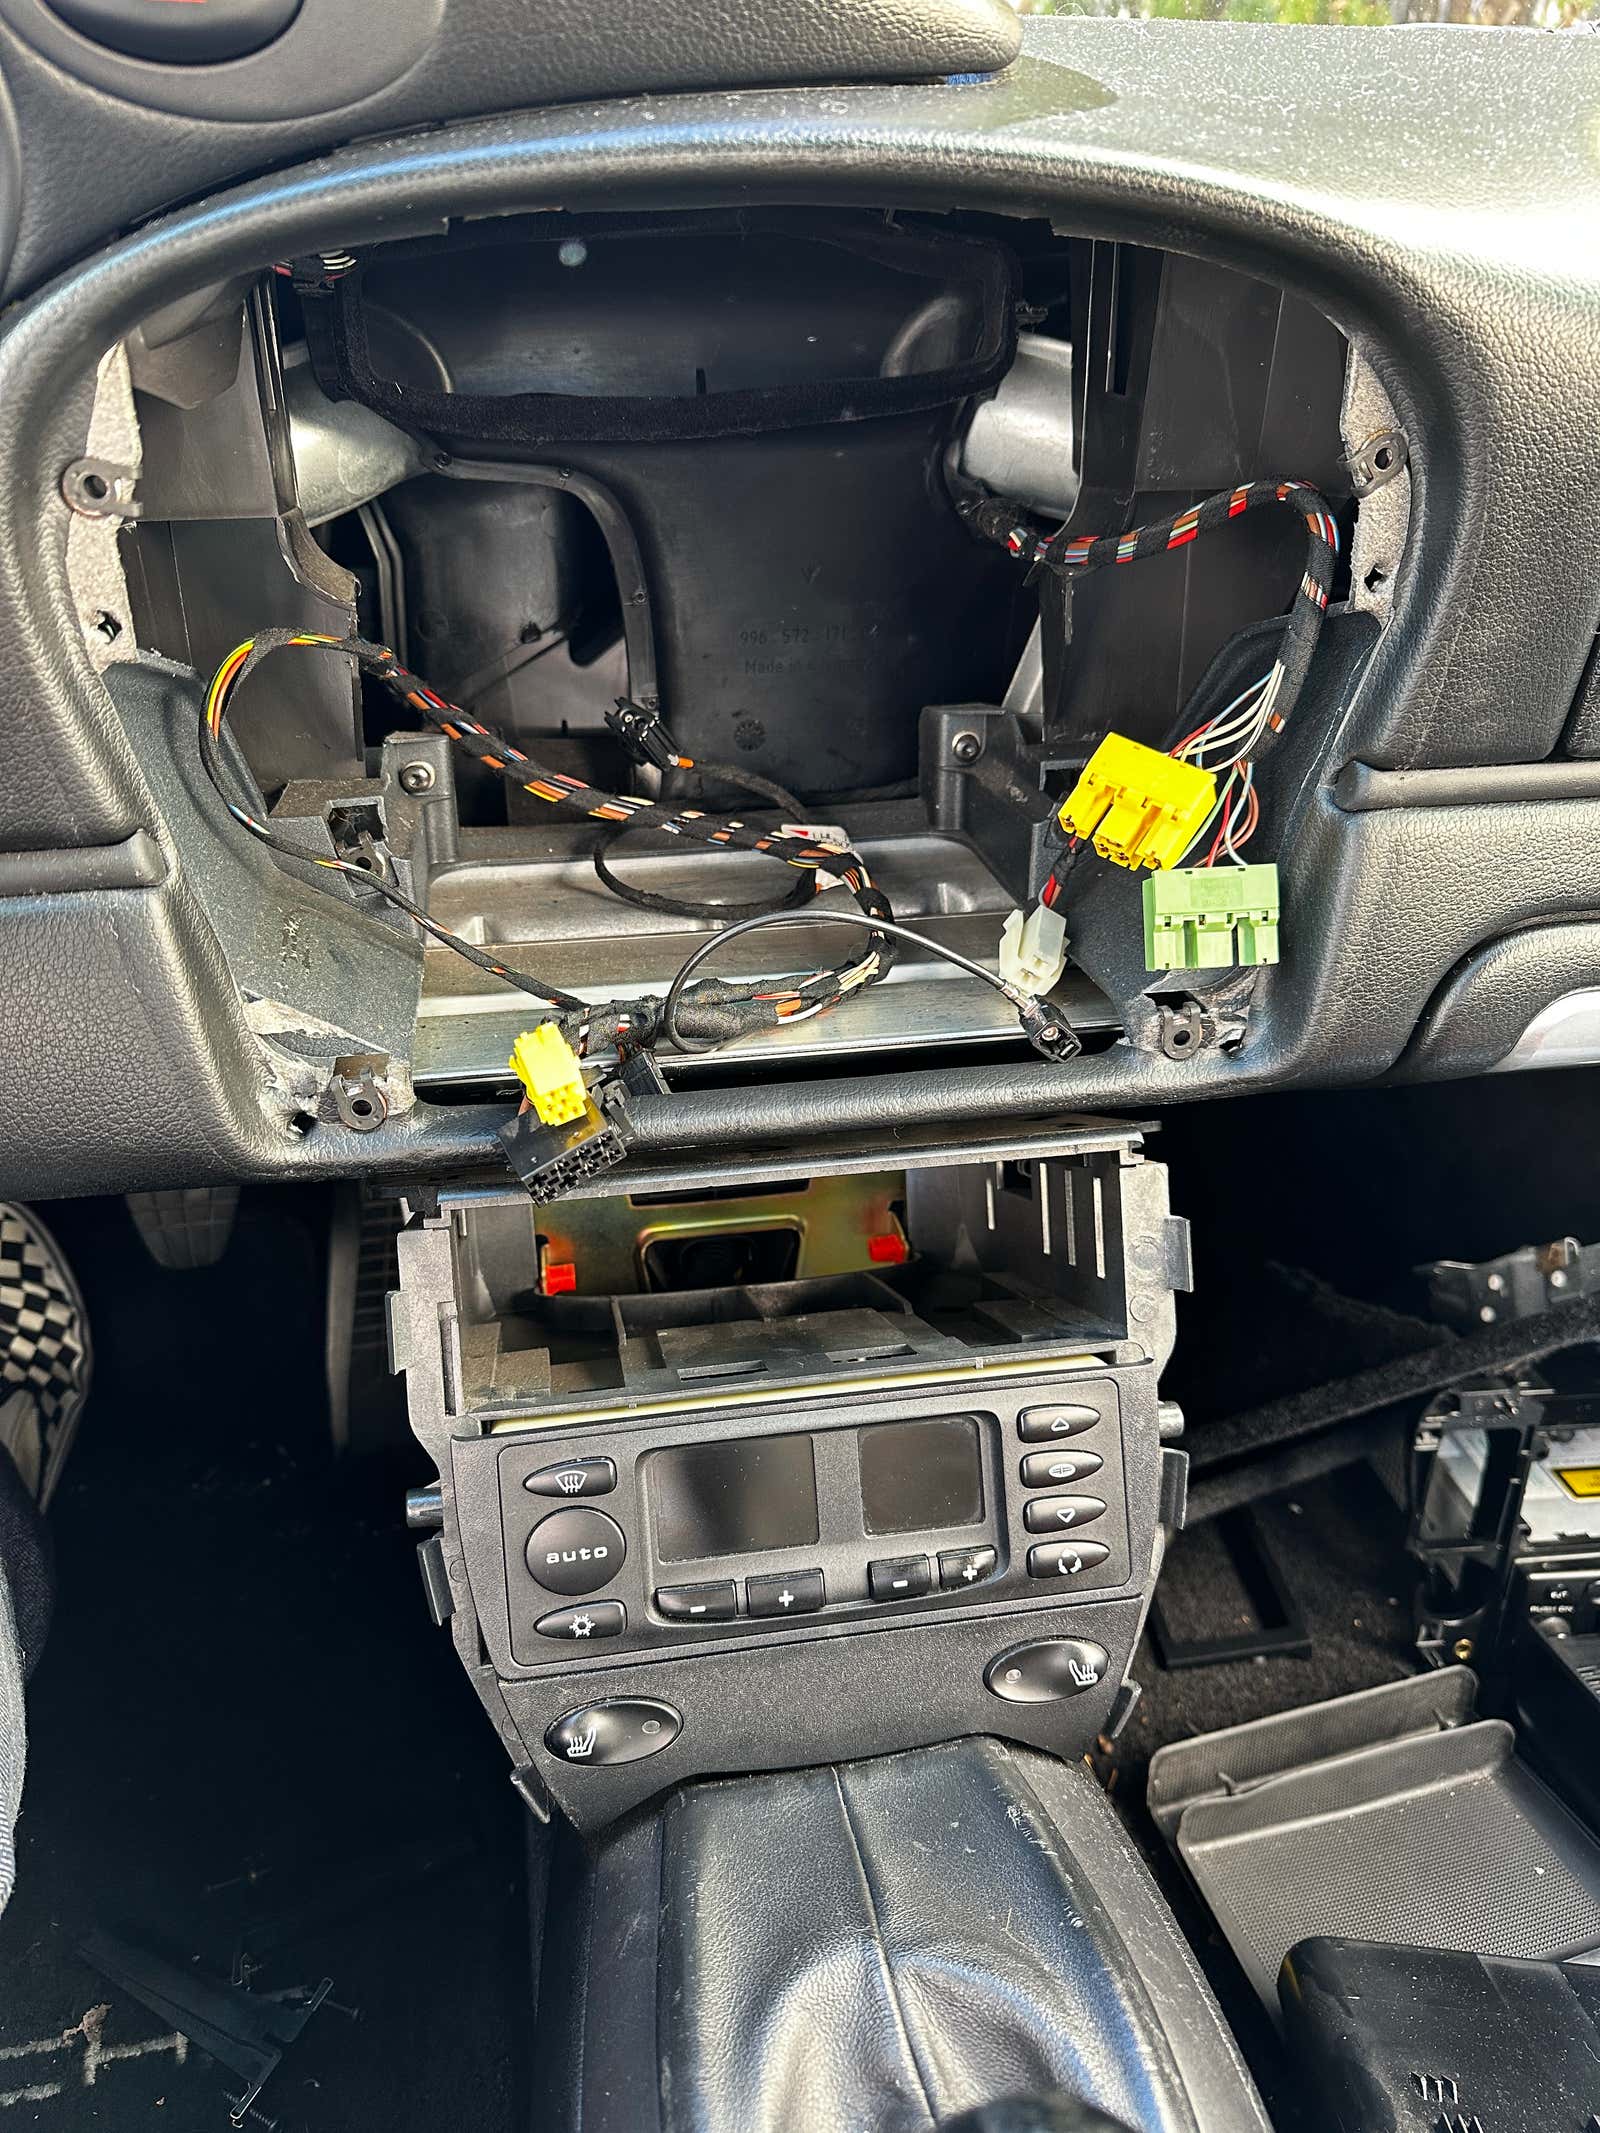 i added apple carplay to my 20-year-old porsche with factory parts